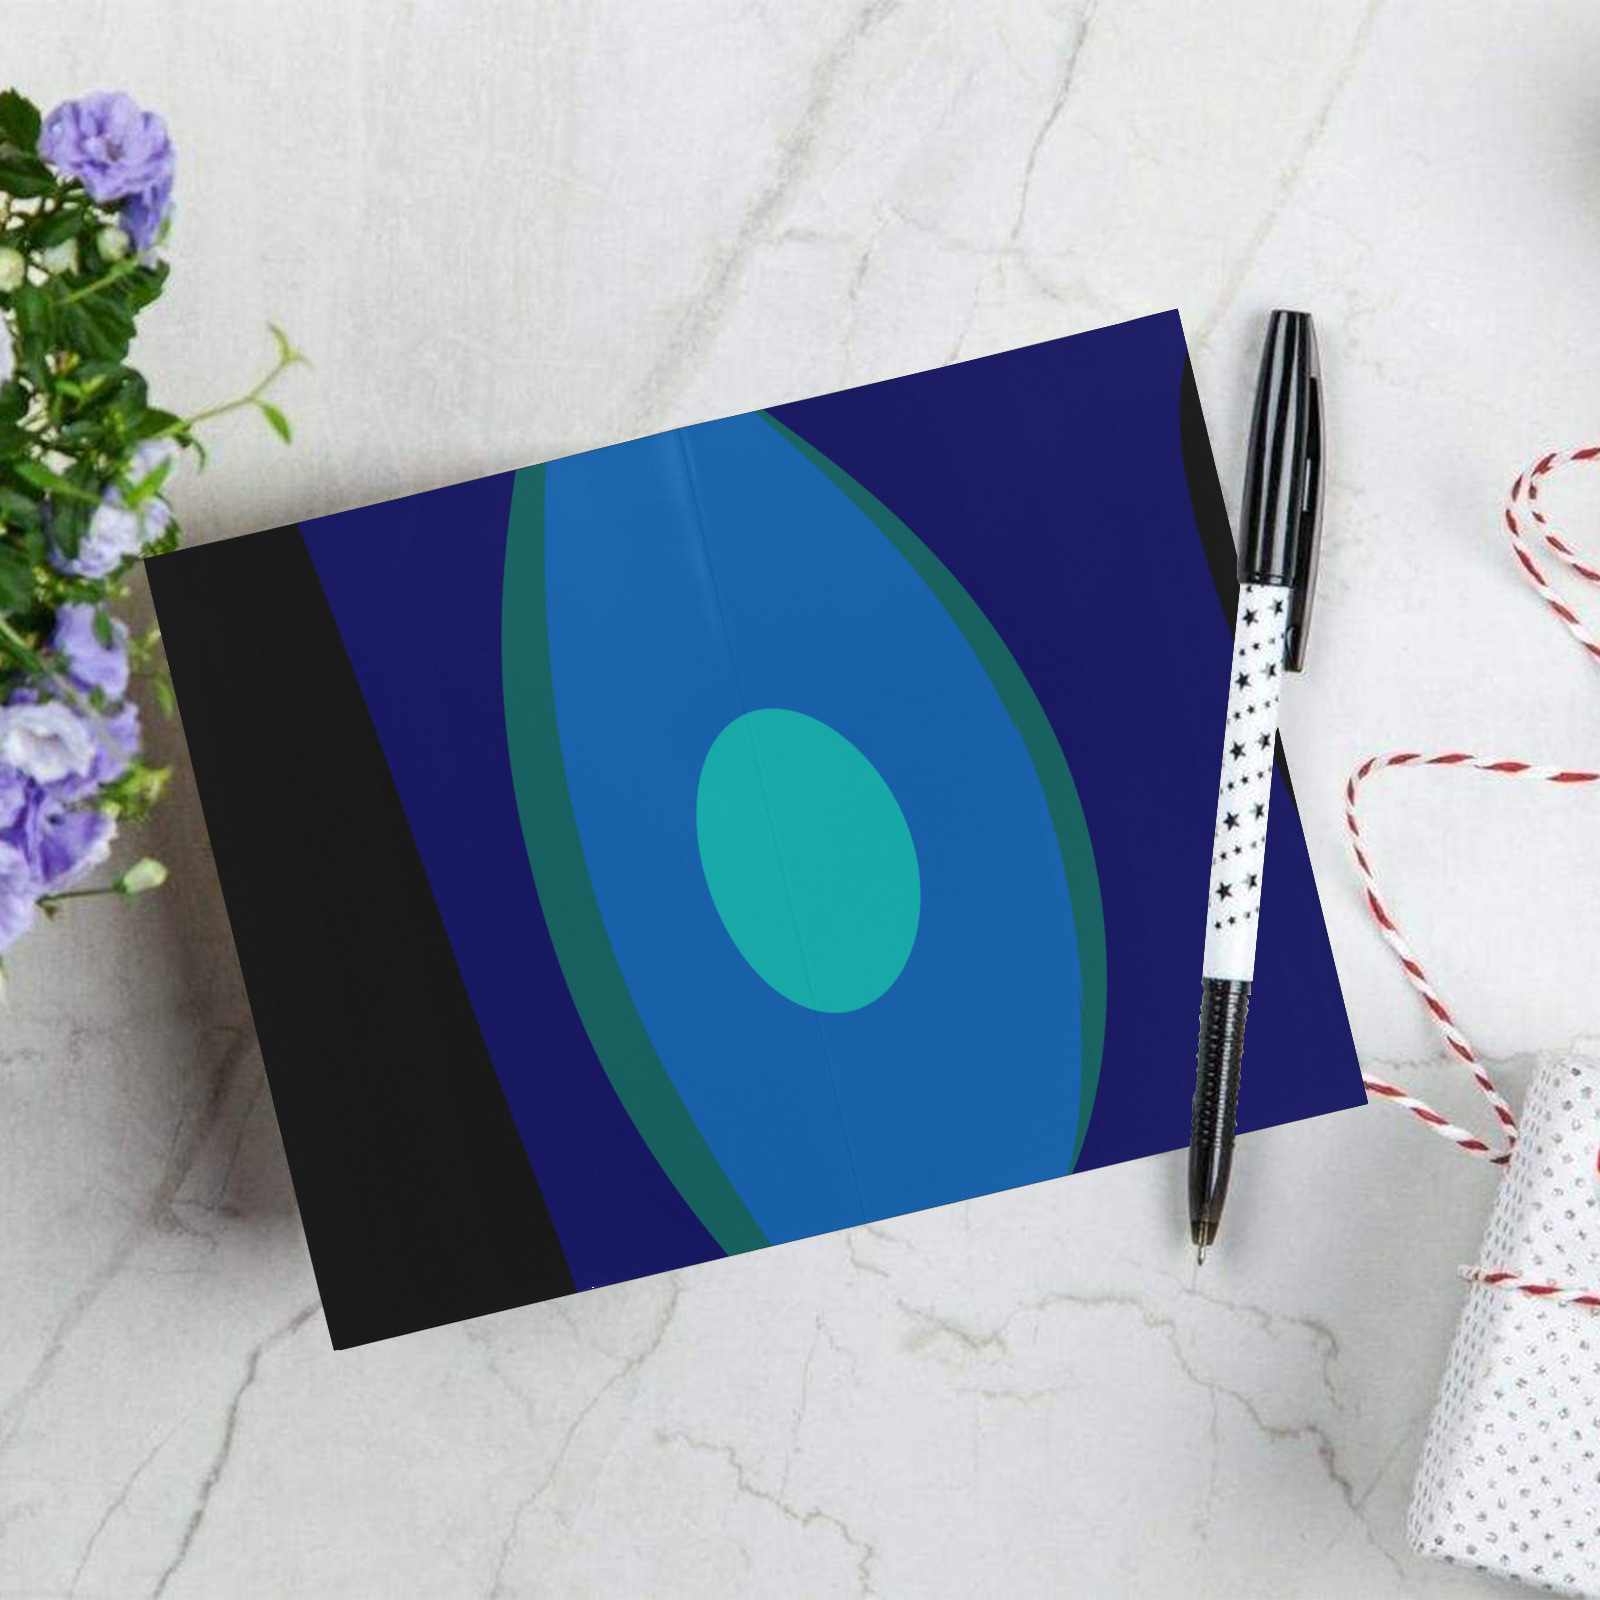 Dimensional Blue Abstract 915 Greeting Card 8"x6"